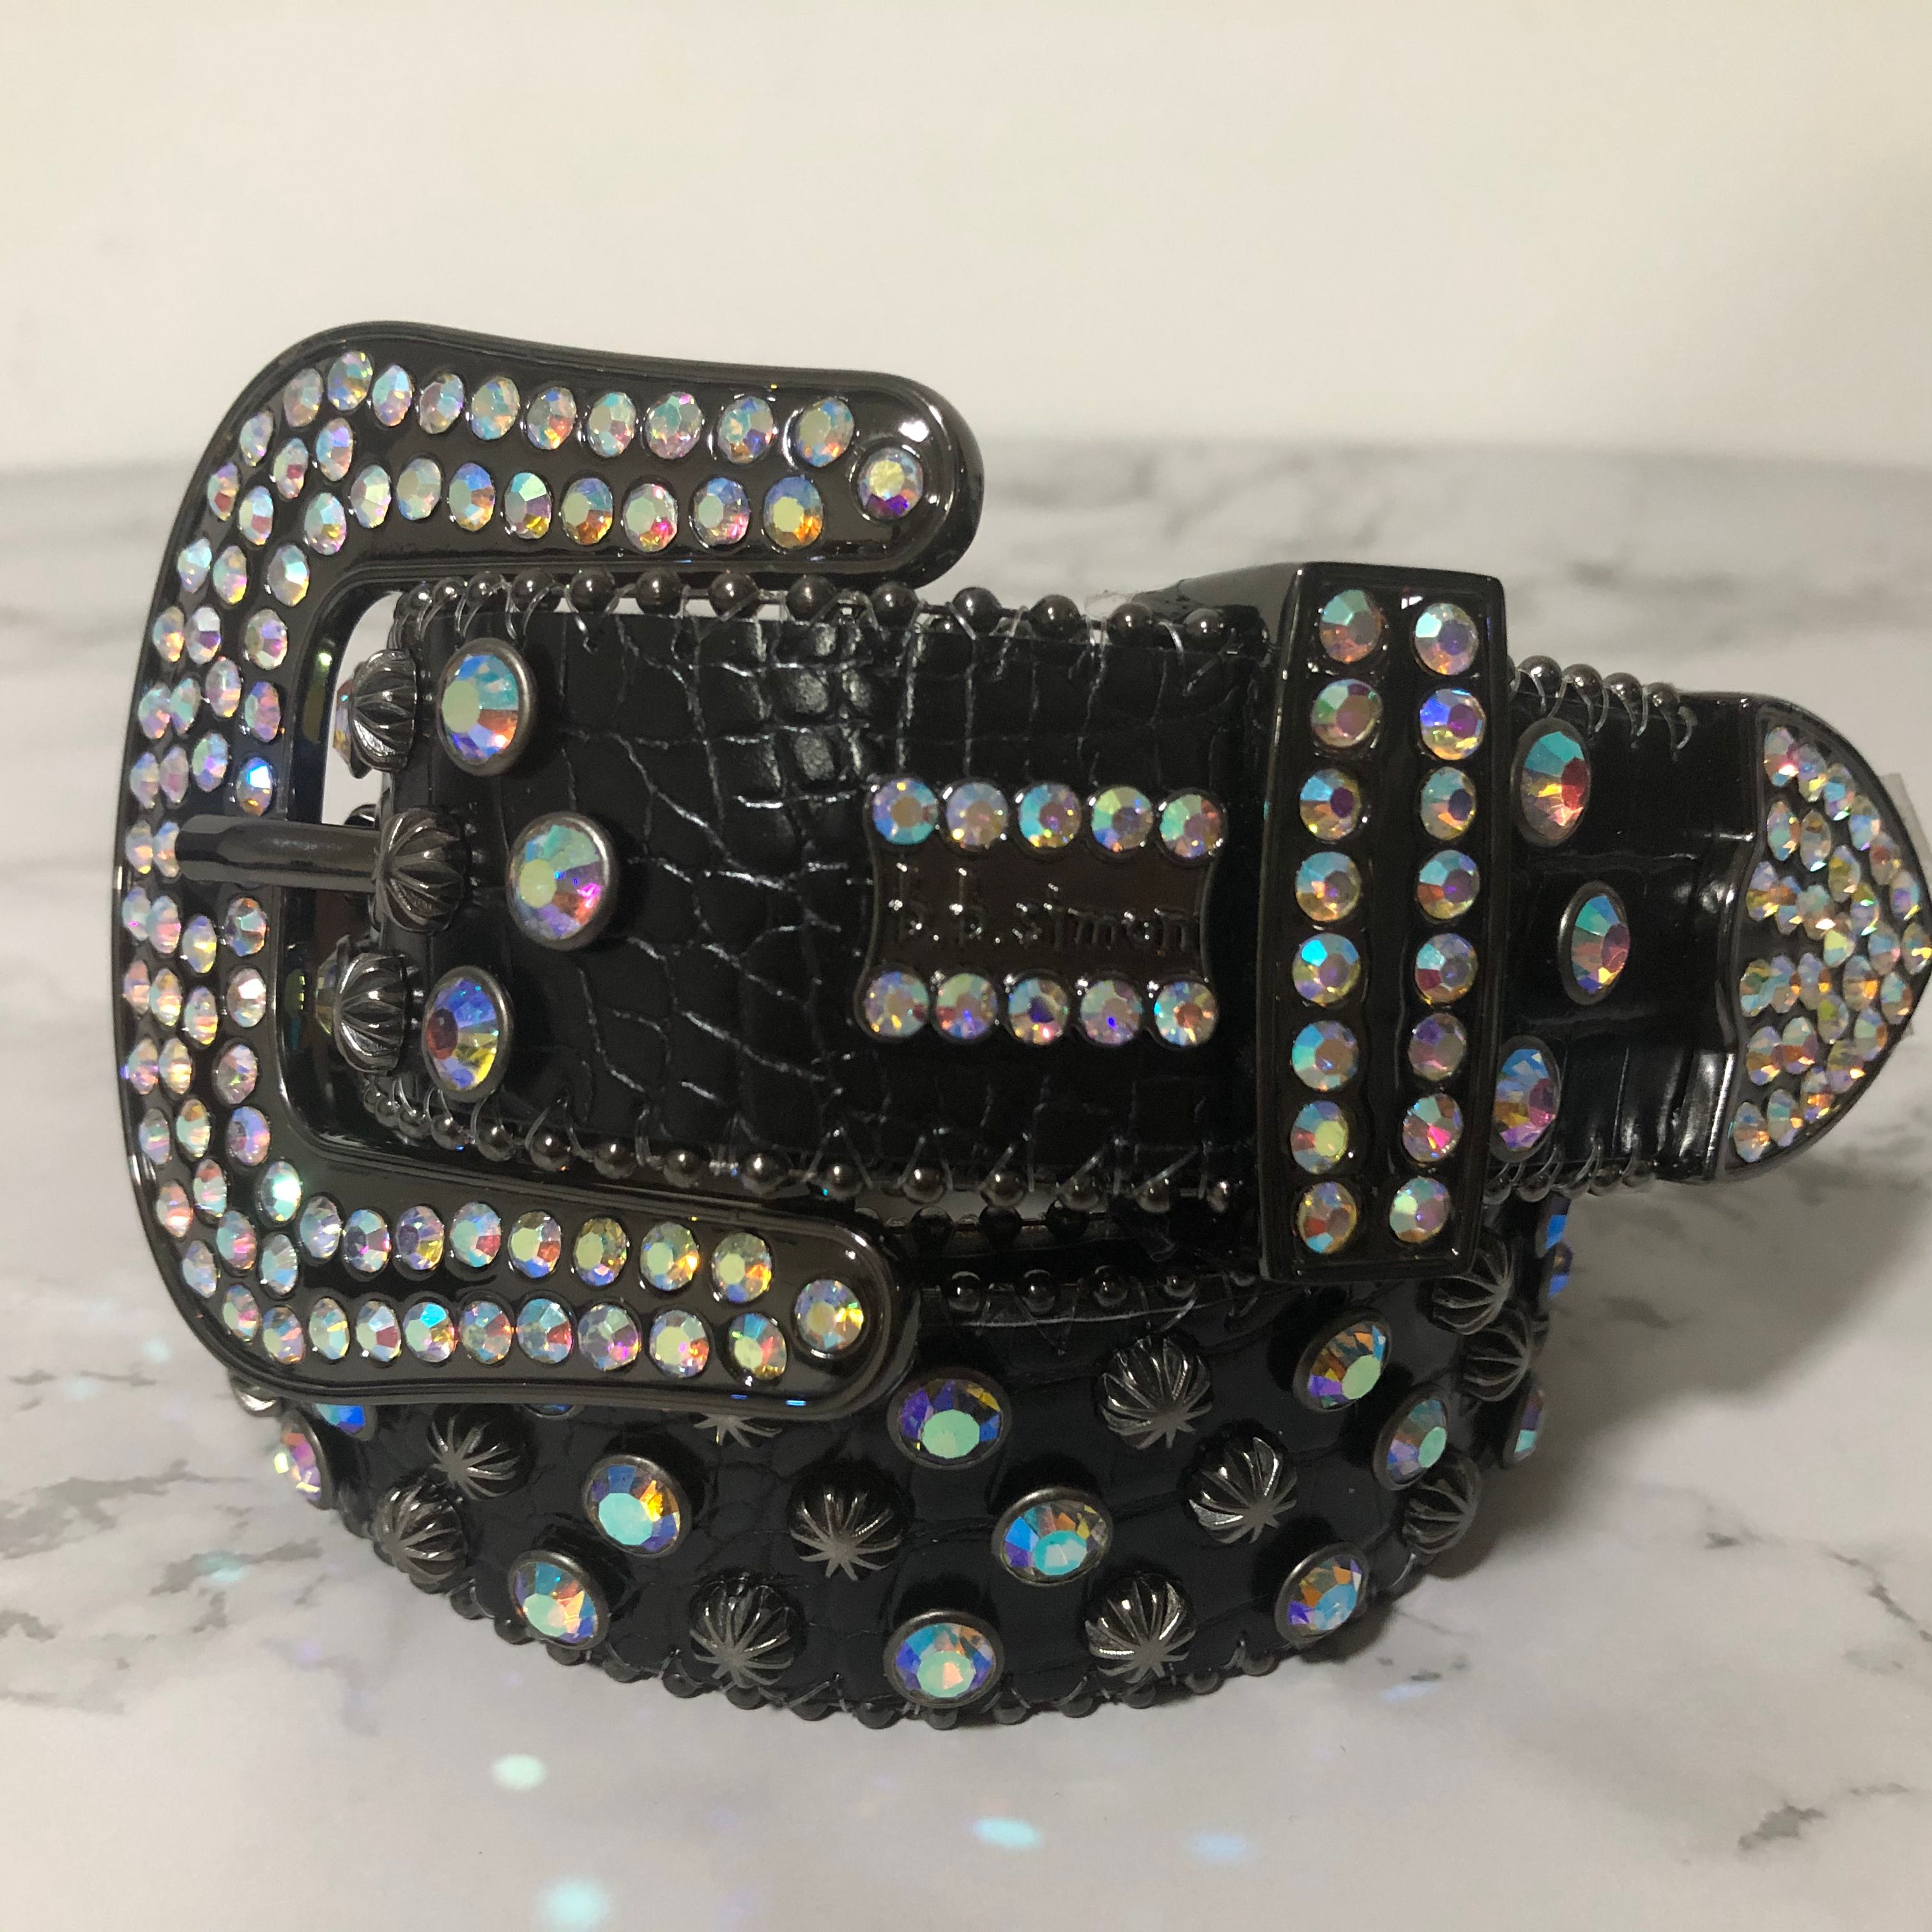 bb simon Silver Merry Leather Belt With Swarovski Crystals